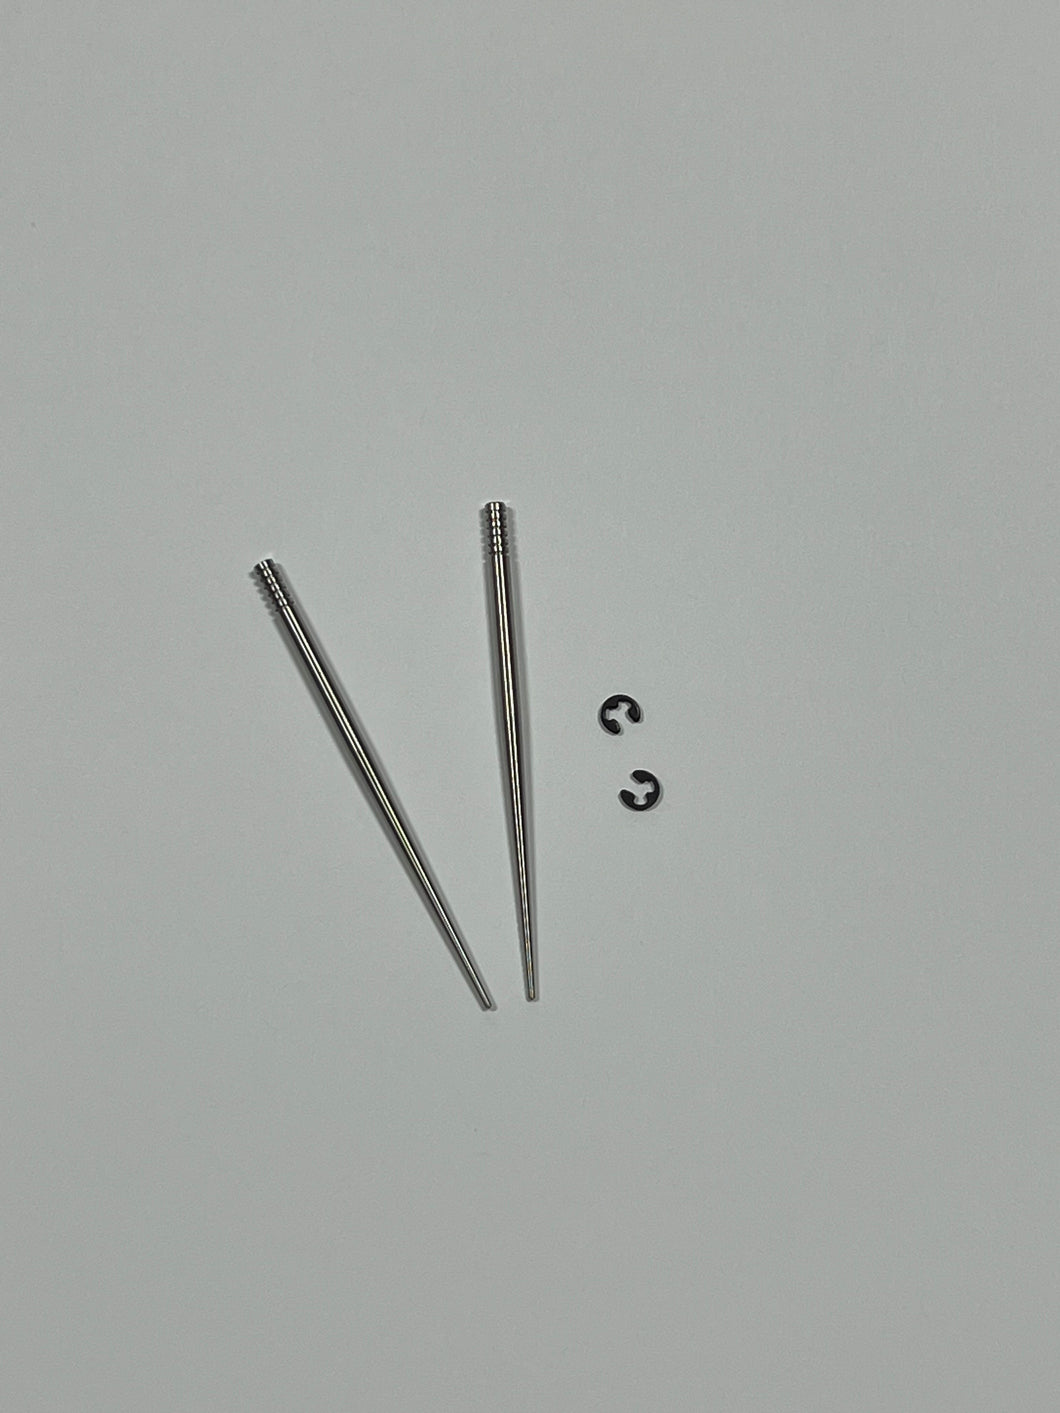 PAIR OF BANSHEE NEEDLES WITH C-CLIPS